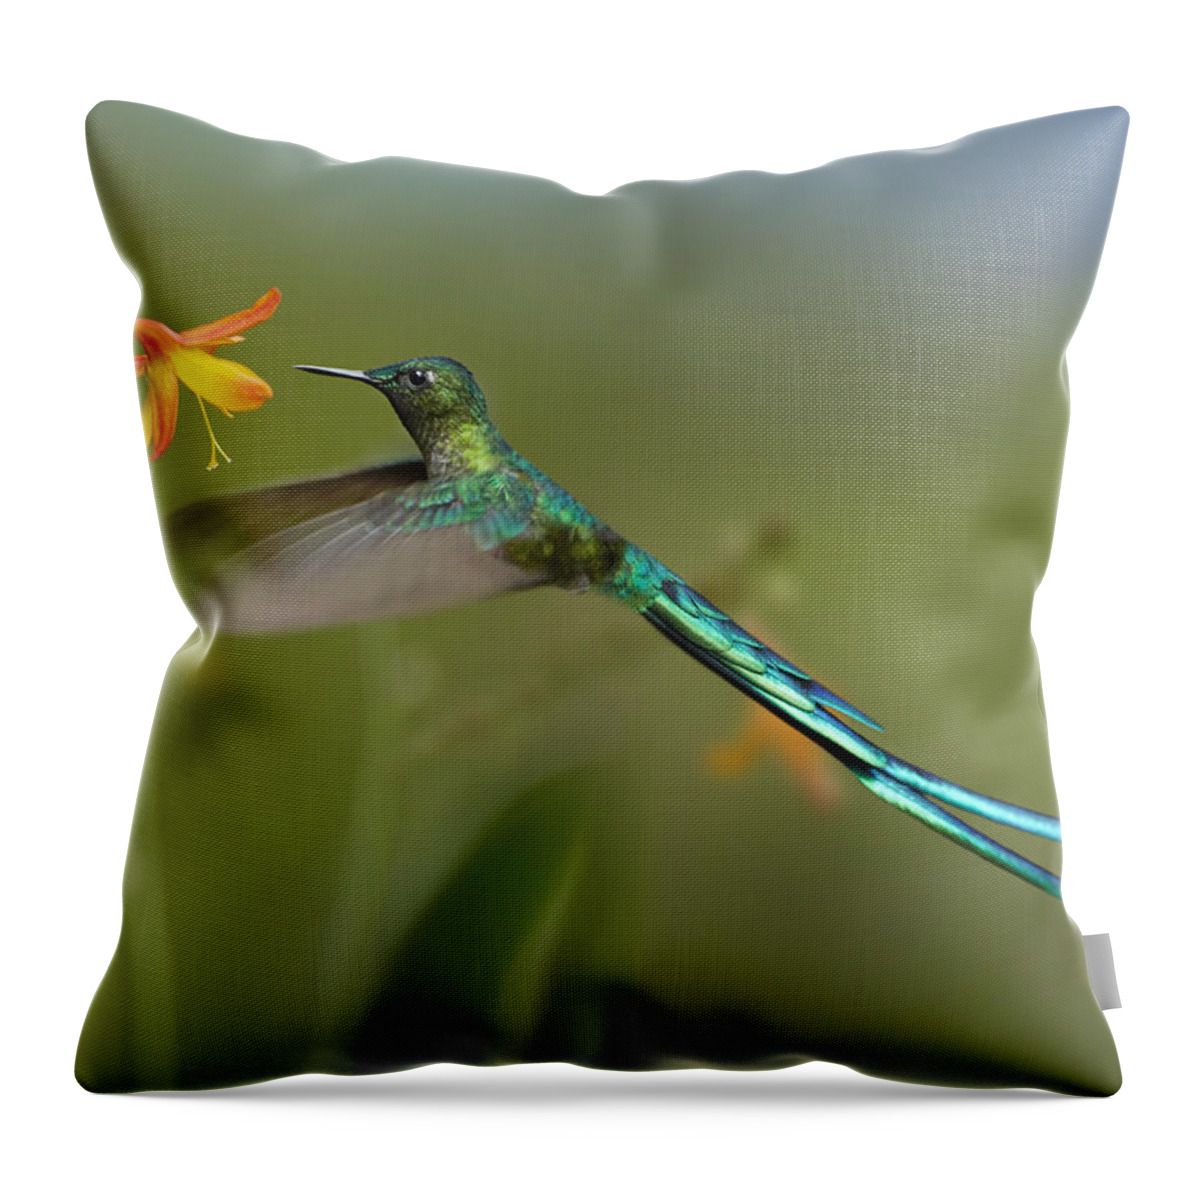 00486961 Throw Pillow featuring the photograph Long Tailed Sylph Feeding On Flower by Tim Fitzharris